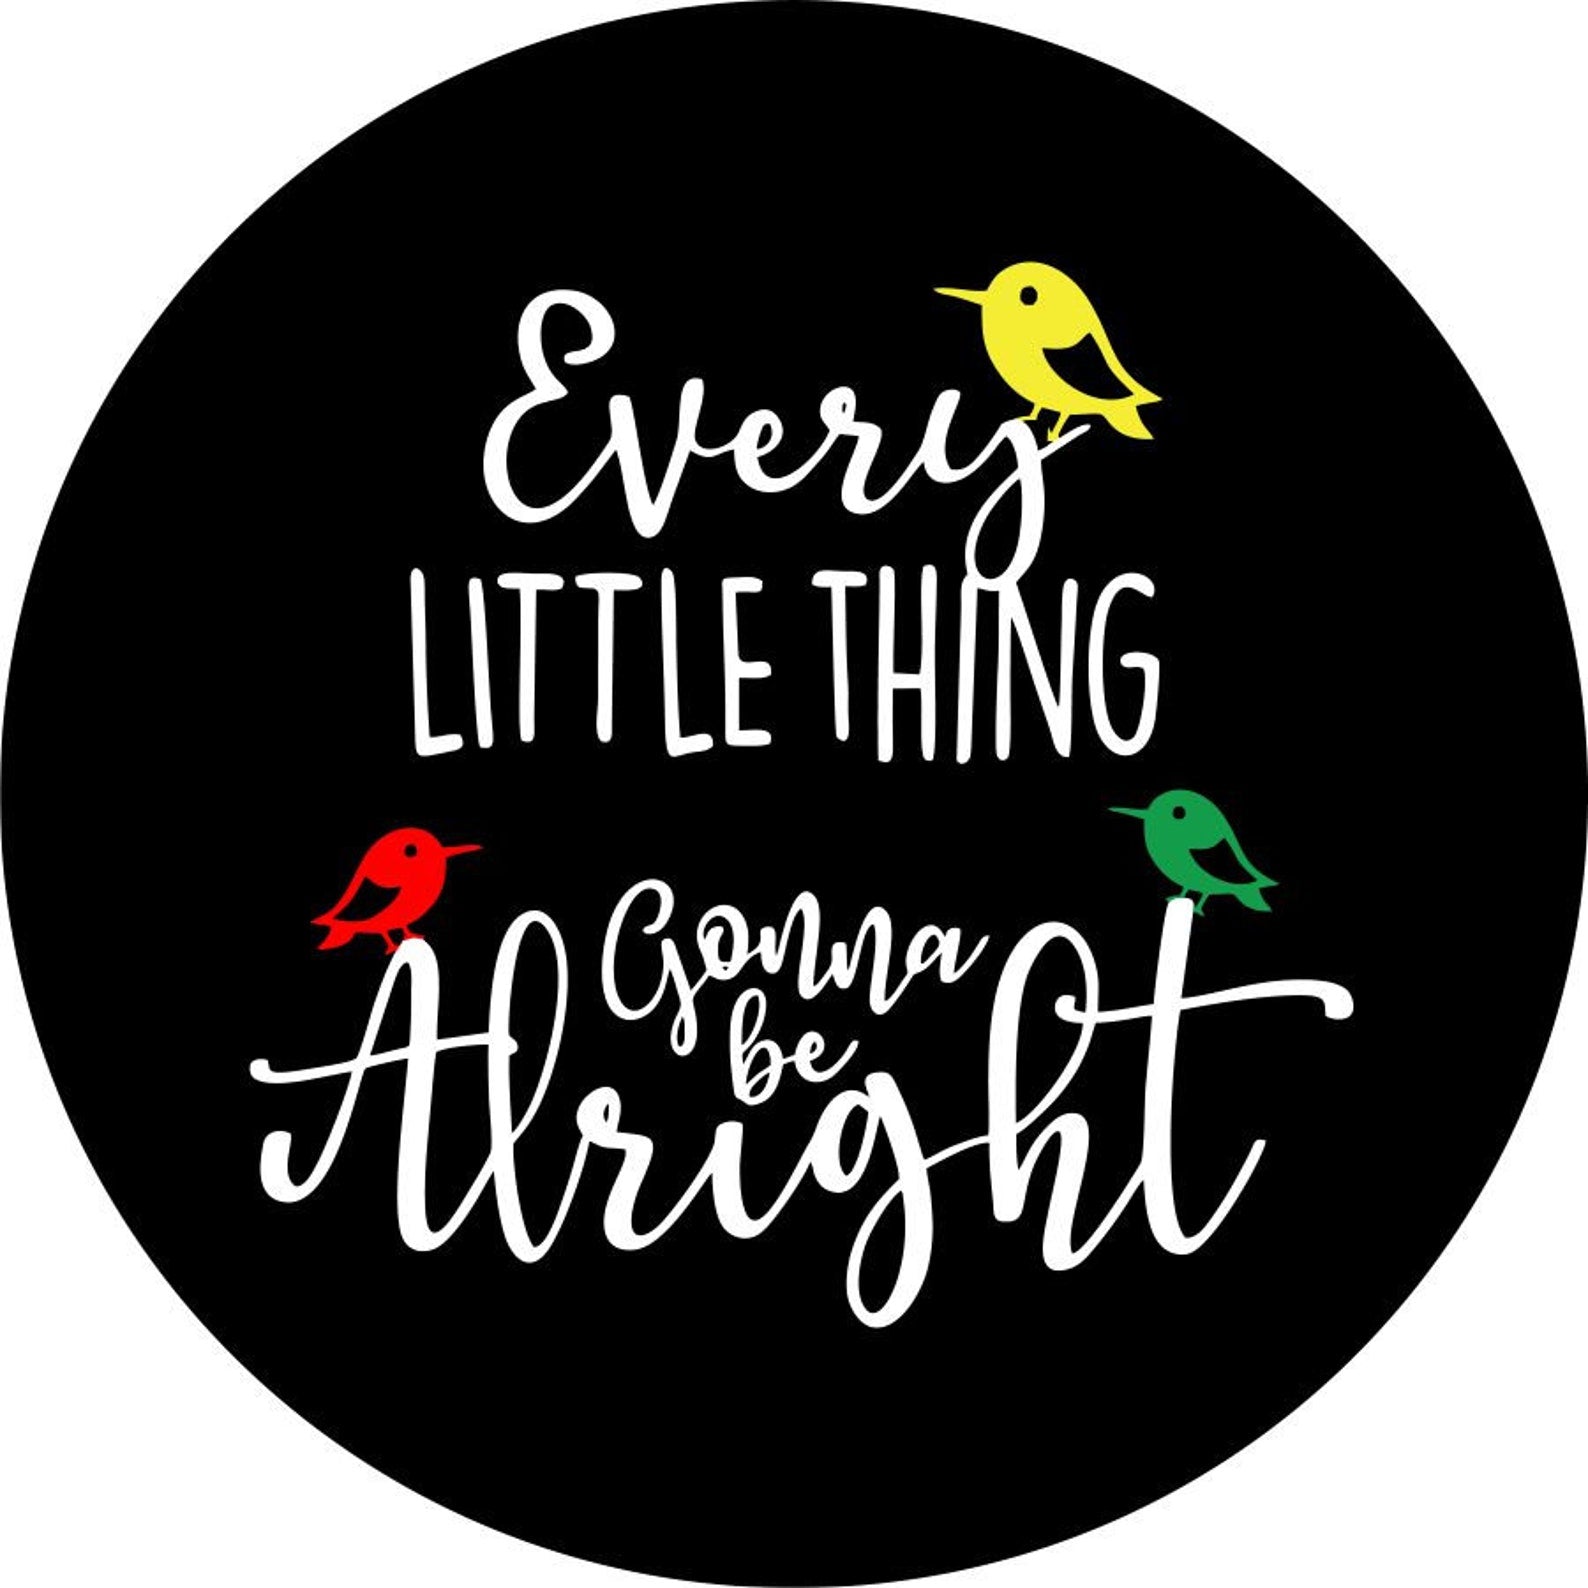 Every Little Thing is Gonna Be Alright + 3 Little Birds